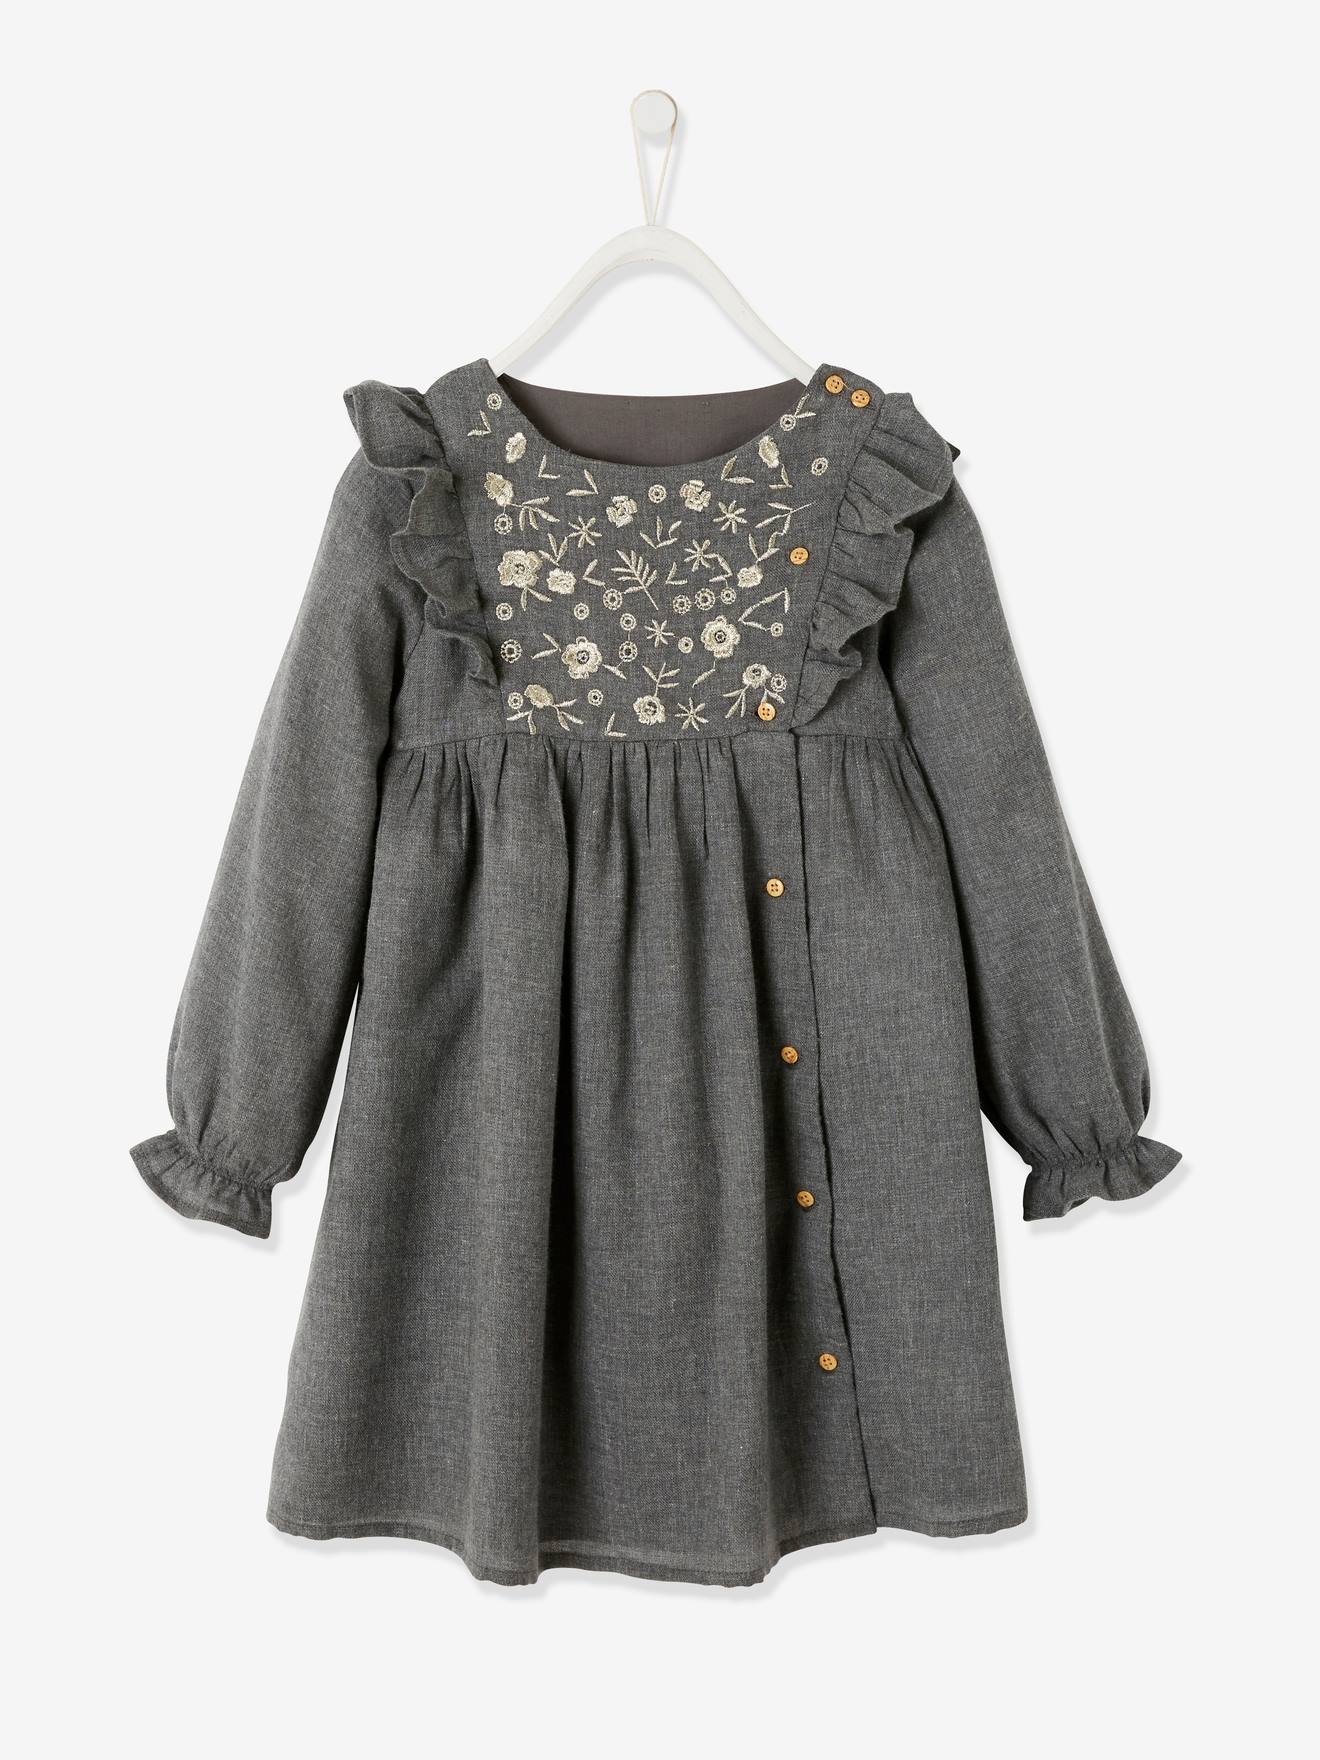 frilly-dress-with-embroidered-iridescent-flowers-for-girls.jpg